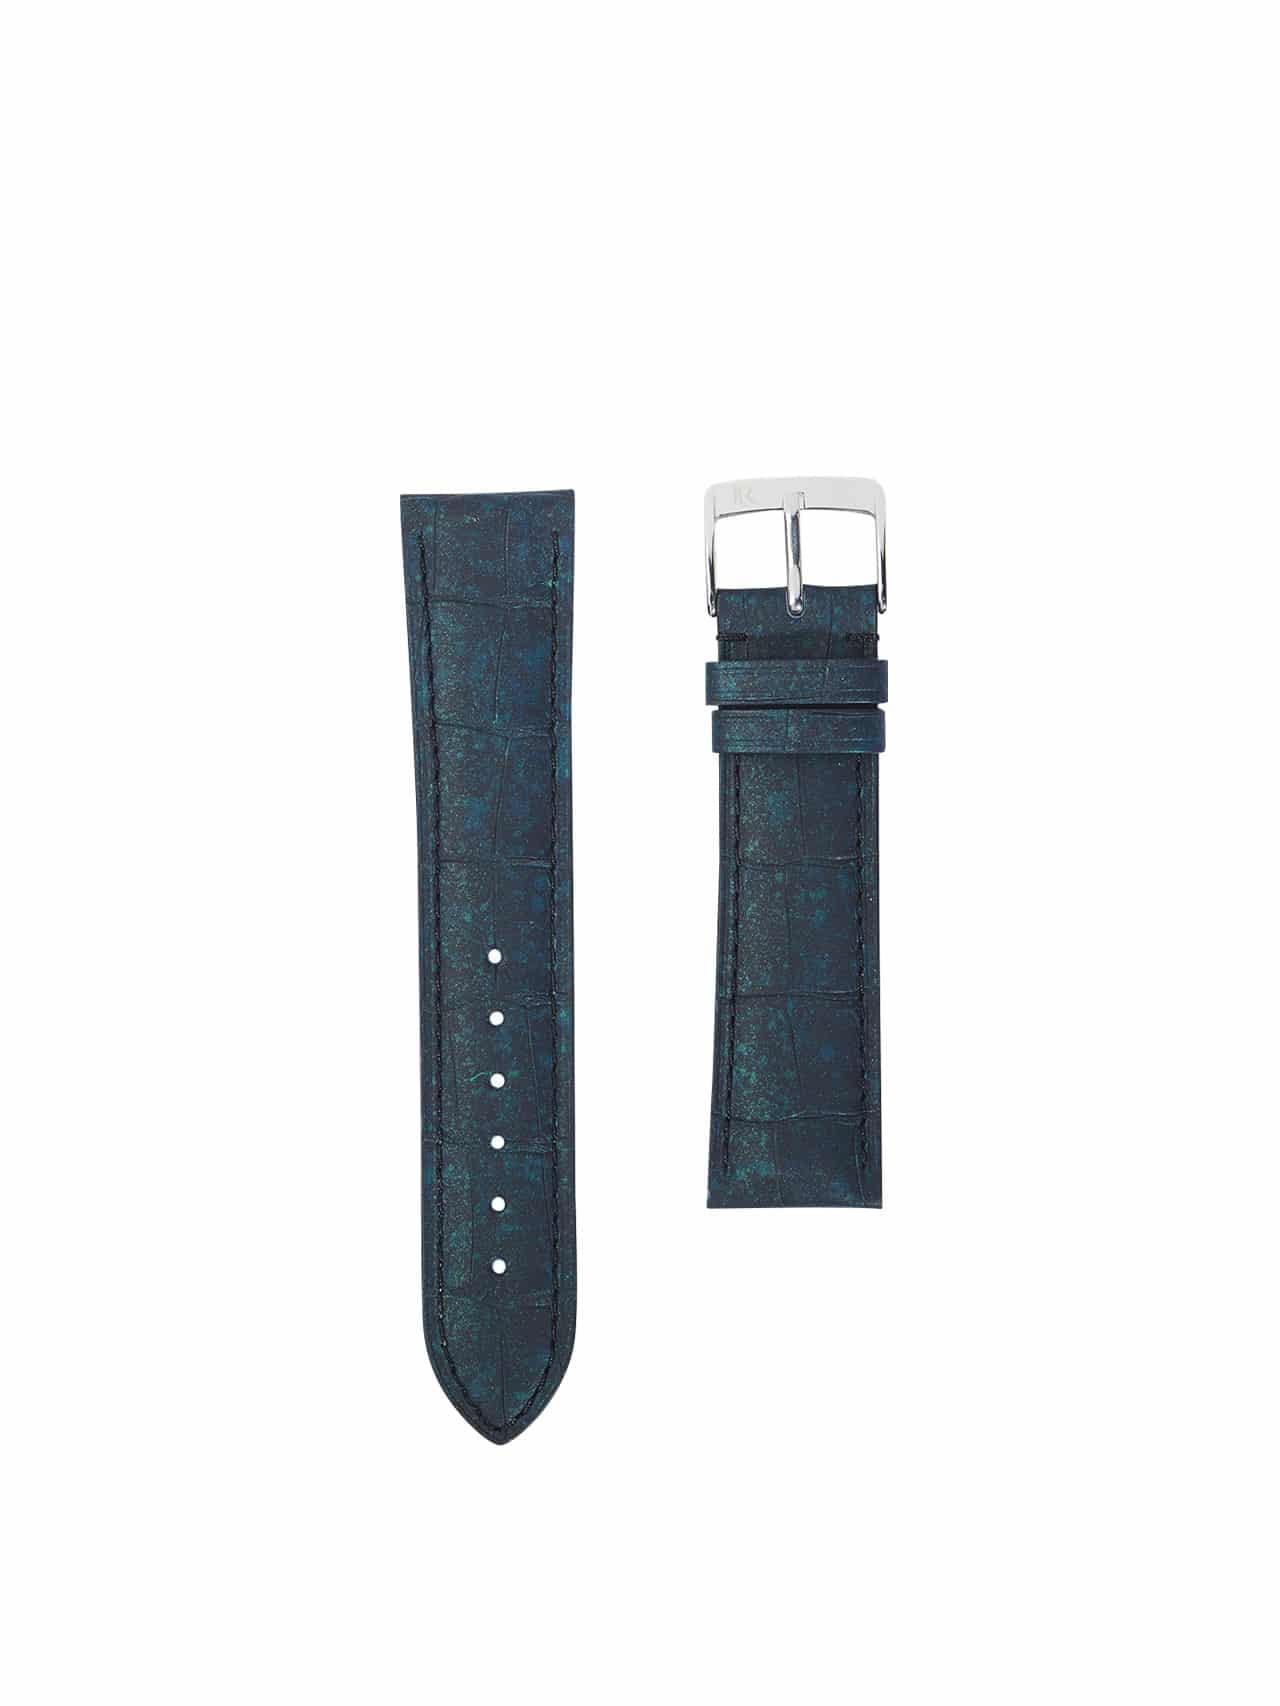 Watch strap 3.5 Asteria rubber touch crocodile green front